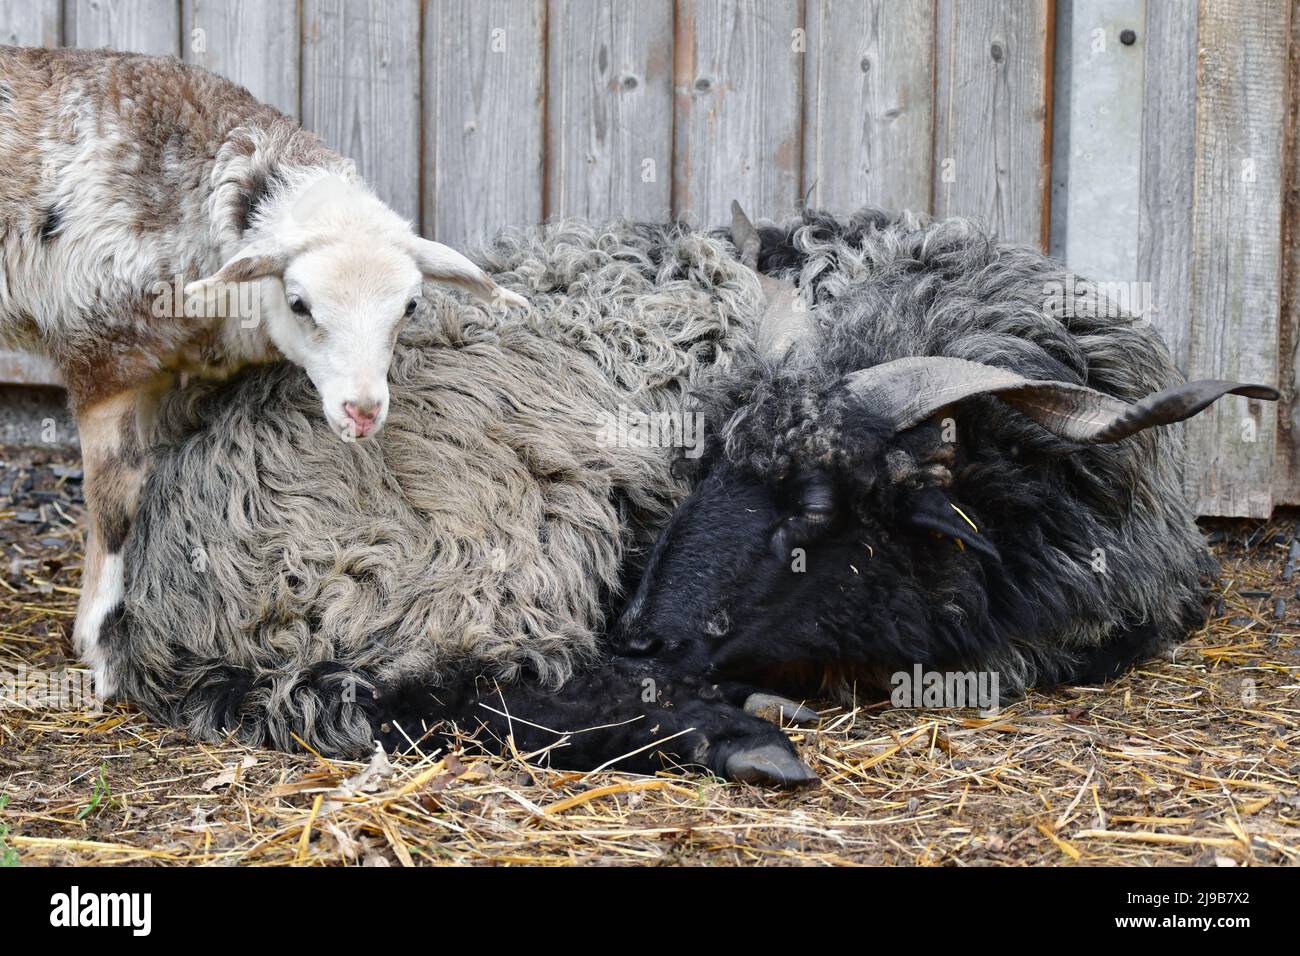 A male black Hortobagy Racka sheep (Ovis aries strepsiceros Hungaricus) with long spiral shaped horns having a rest, a cute lamb coming by. Stock Photo